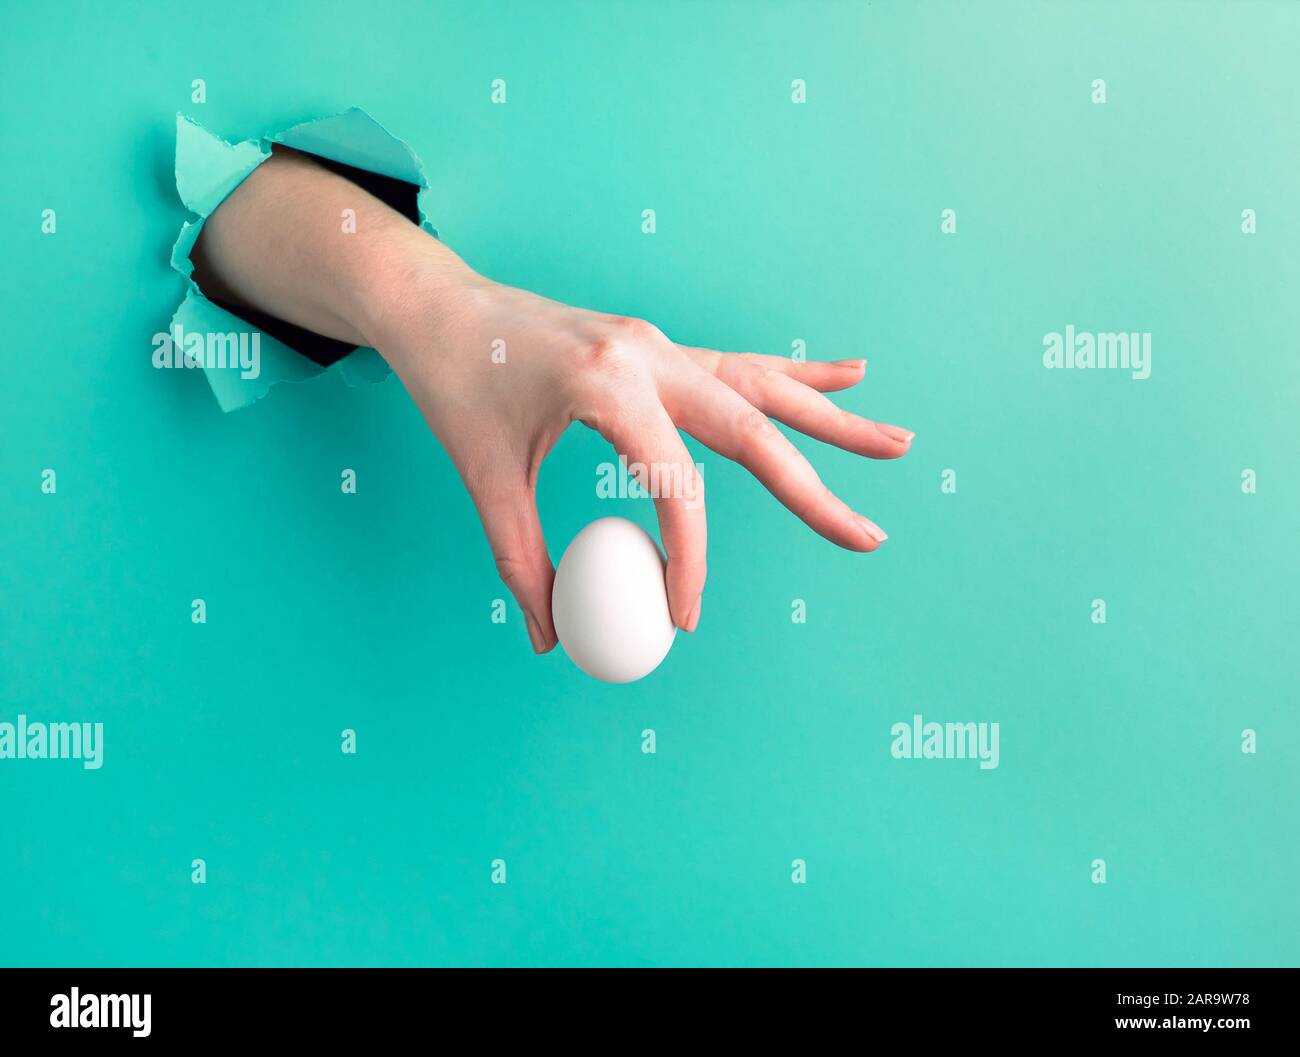 A woman's hand holds a white egg through a hole on a green background. Horizontal photo with copy space Stock Photo